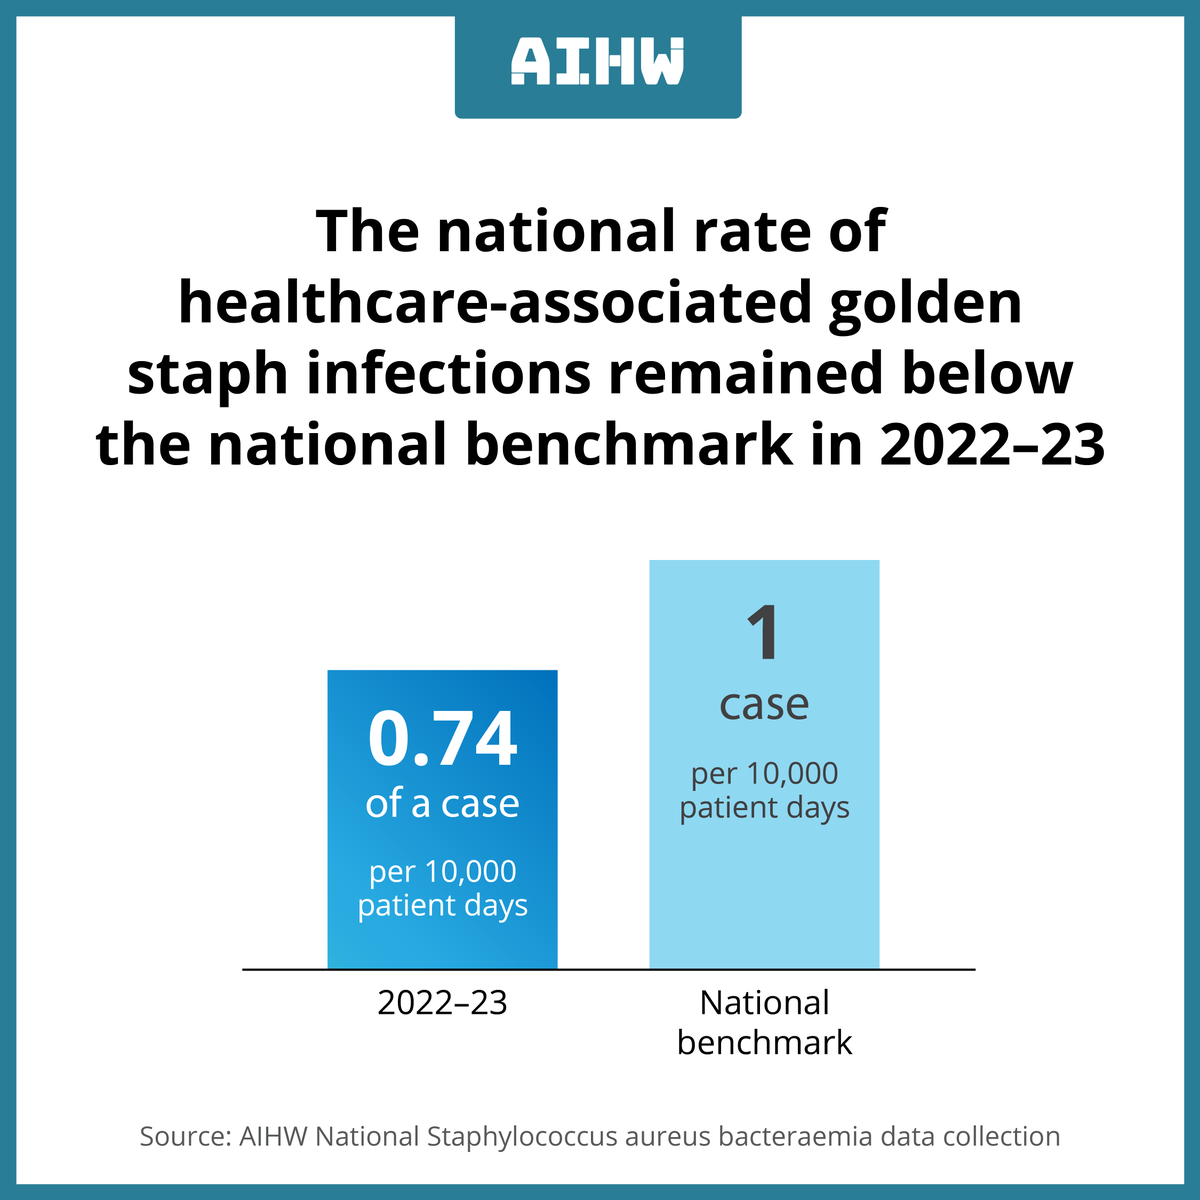 Staphylococcus aureus ‘golden staph' is a type of bacteria that can cause bloodstream infection. The national rate of golden staph infection remained below the nationally agreed benchmark in 2022–23. Learn more brnw.ch/21wJRGs #goldenstaph #staphylococcusaureus